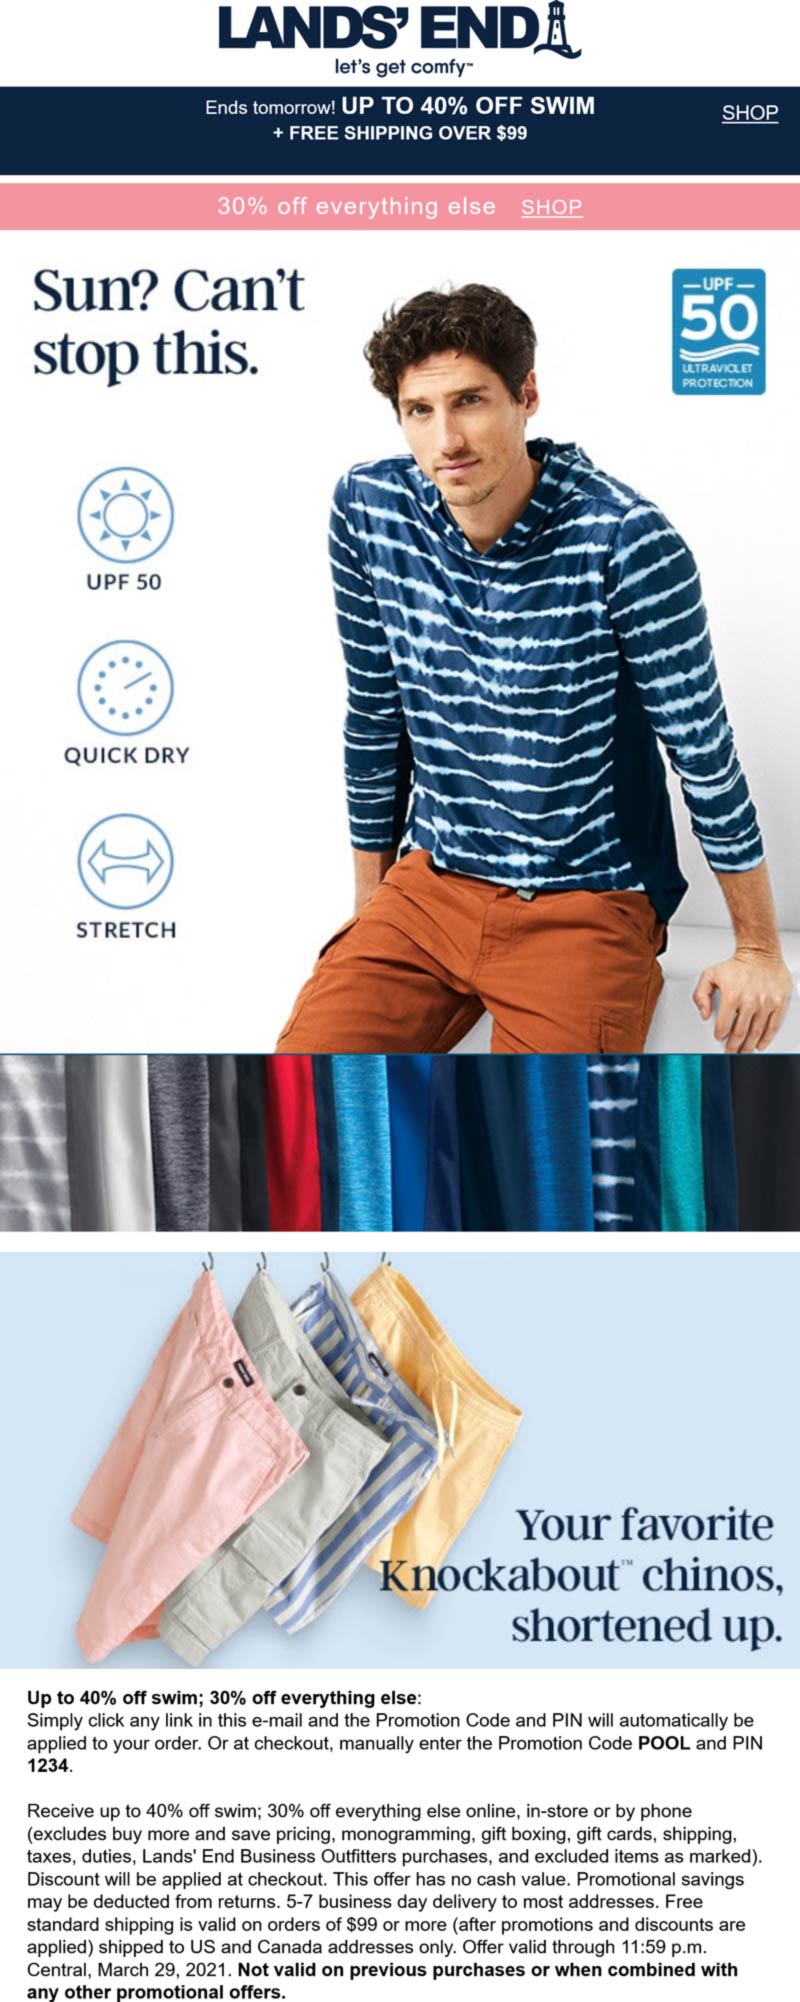 Lands End stores Coupon  30% off everything & more at Lands End via promo code POOL and pin 1234 #landsend 